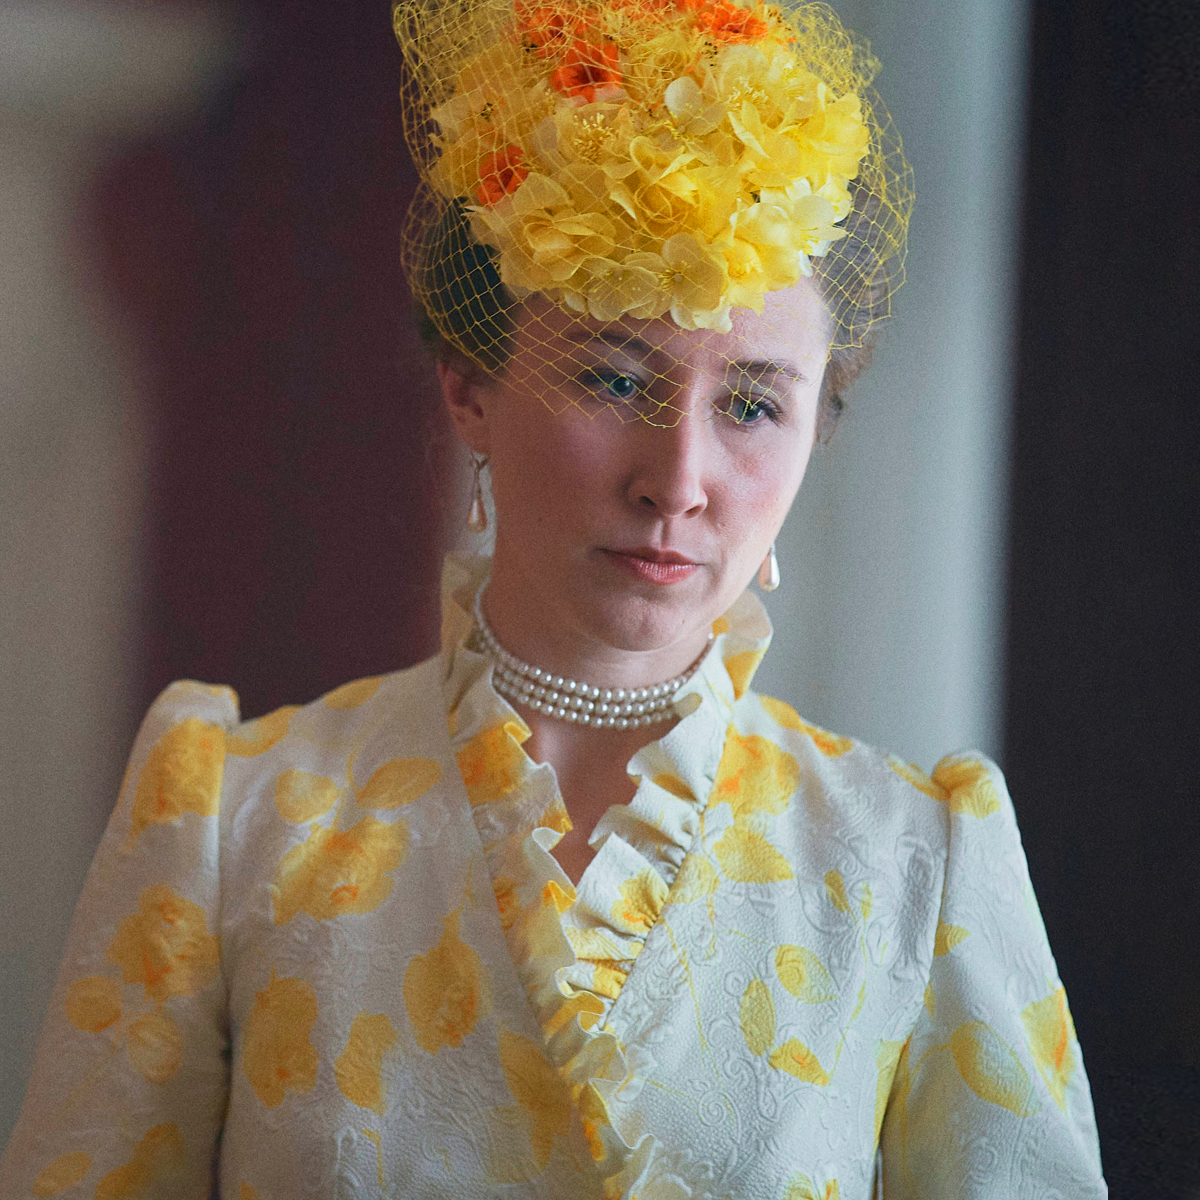 Erin Doherty Felt Need to “Withhold” Sexuality During The Crown